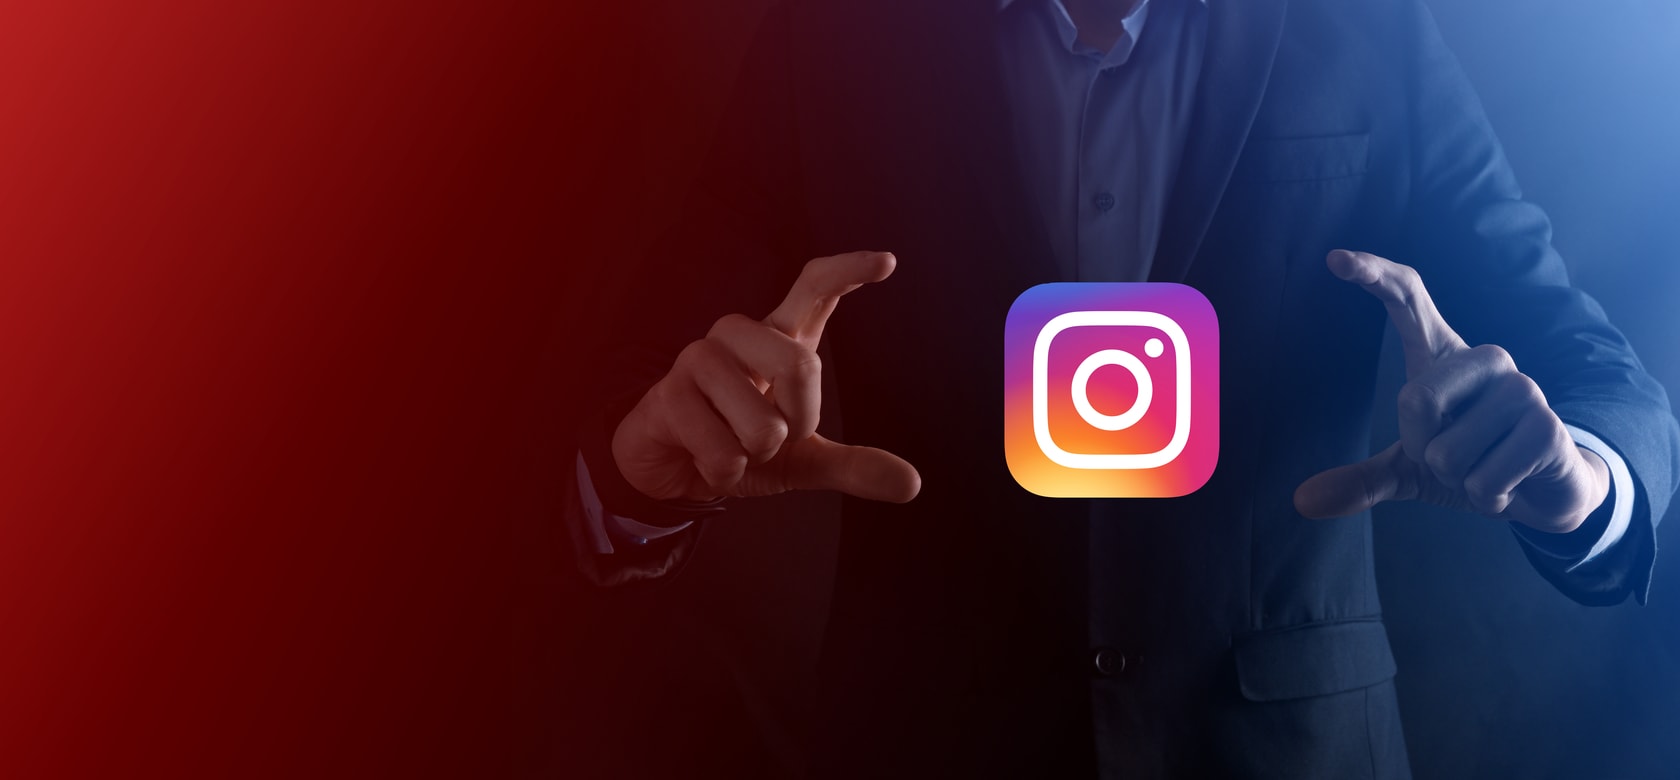 Why Isn’t my Instagram Growing? 7 Simple Yet Powerful Ways to Grow Your Instagram Following